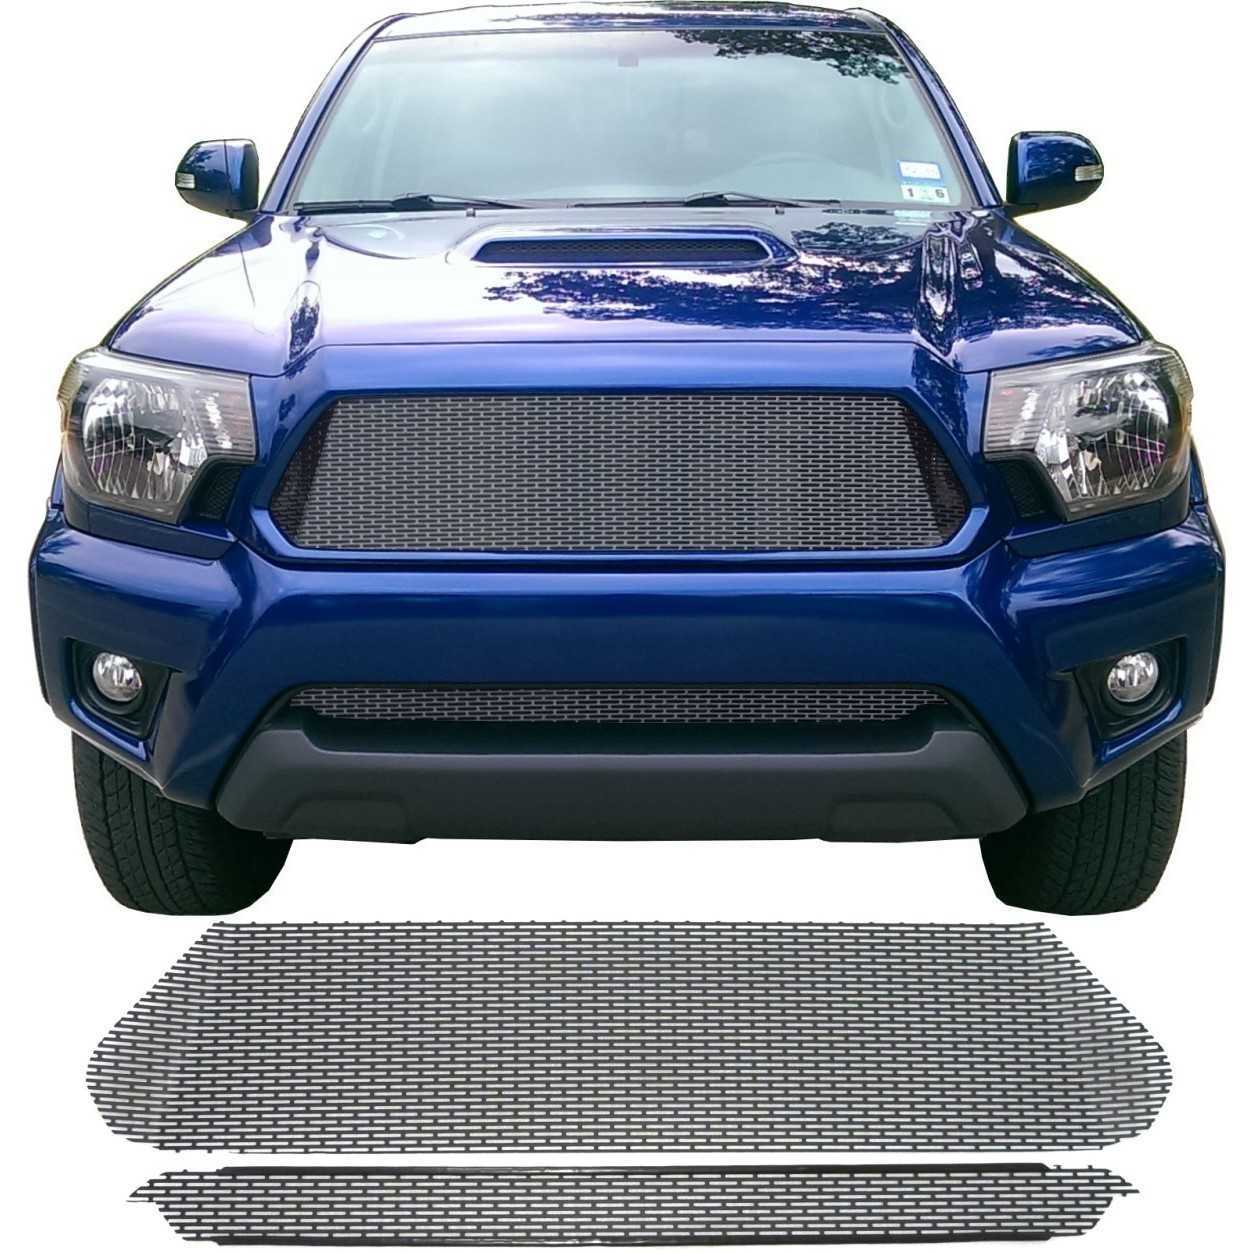 2012 - 2015 Toyota Tacoma Grill Mesh Builder #1